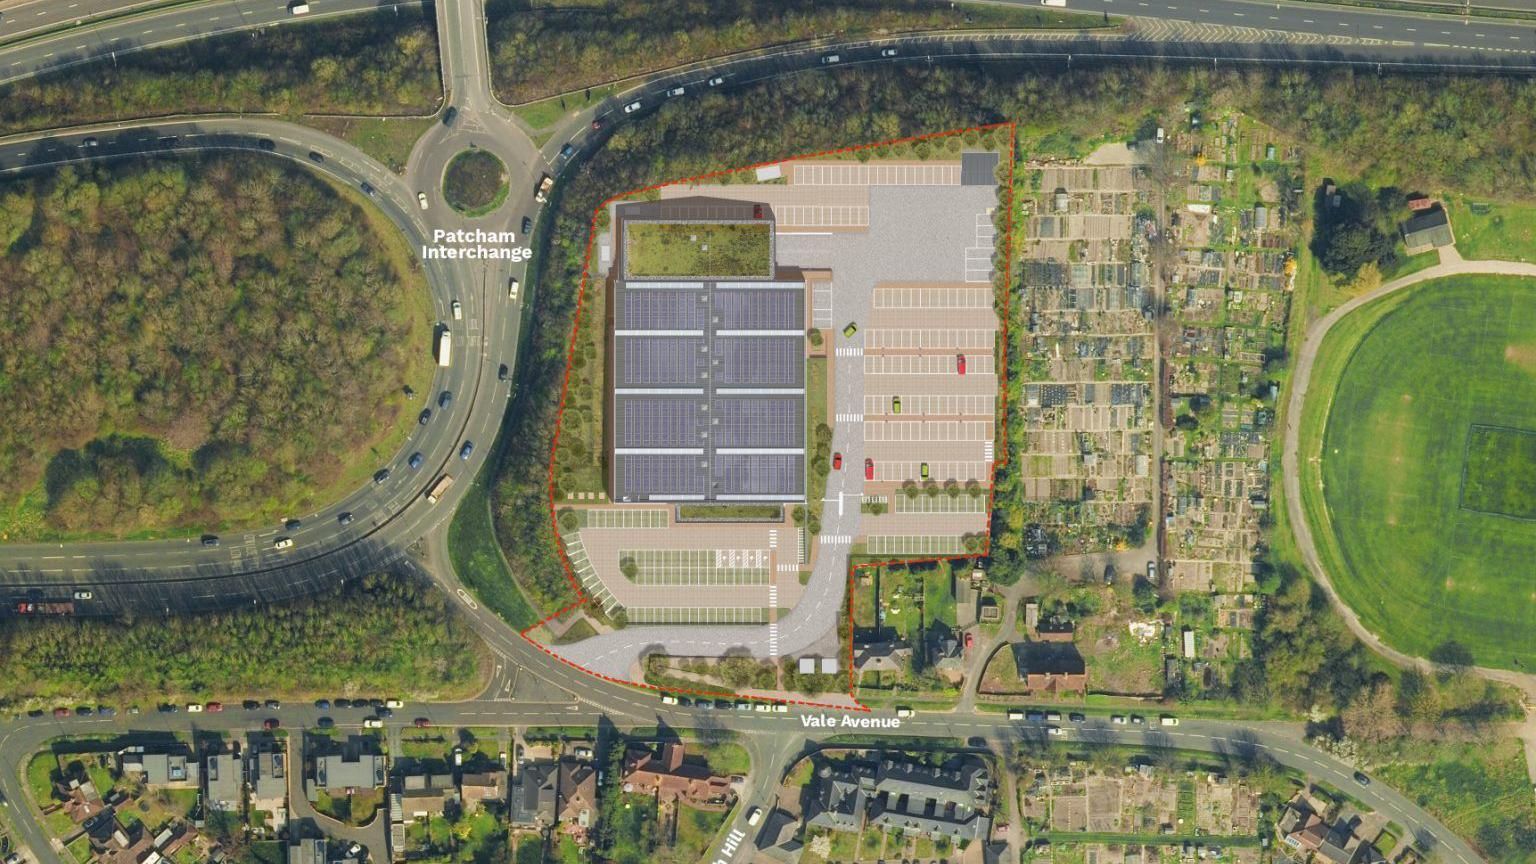 The proposed Royal Mail delivery office from above